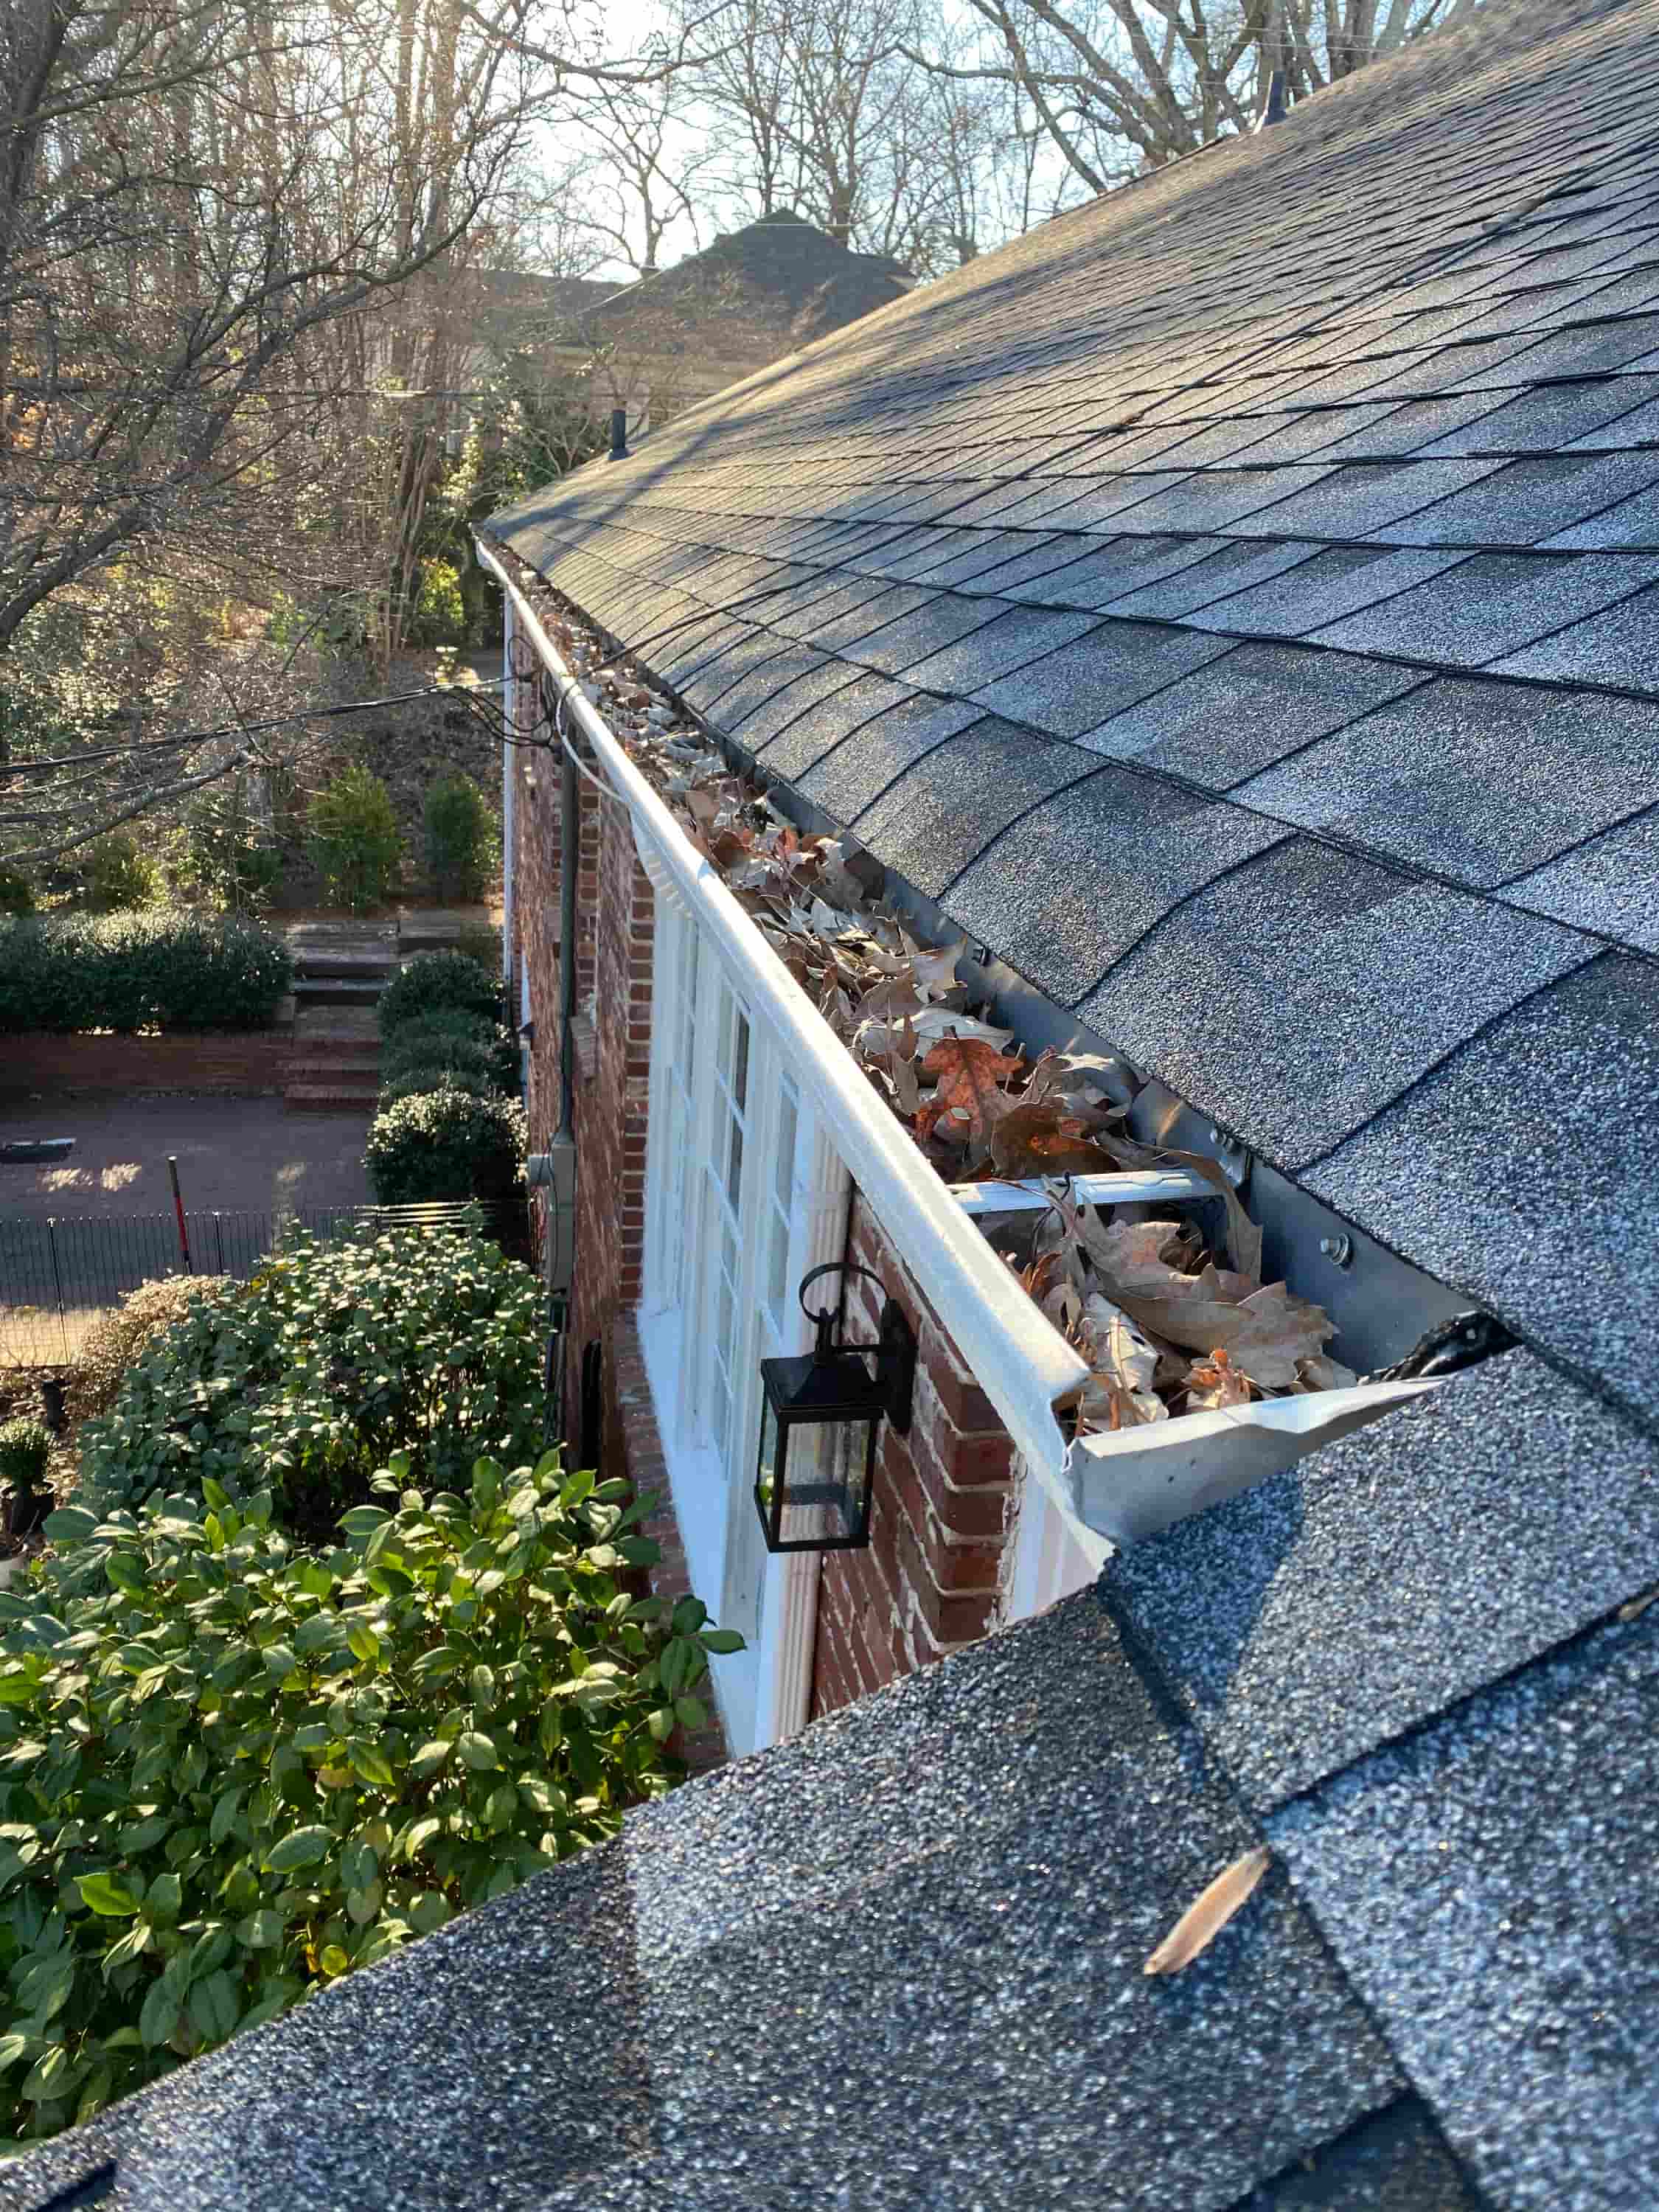 cleaning of gutters